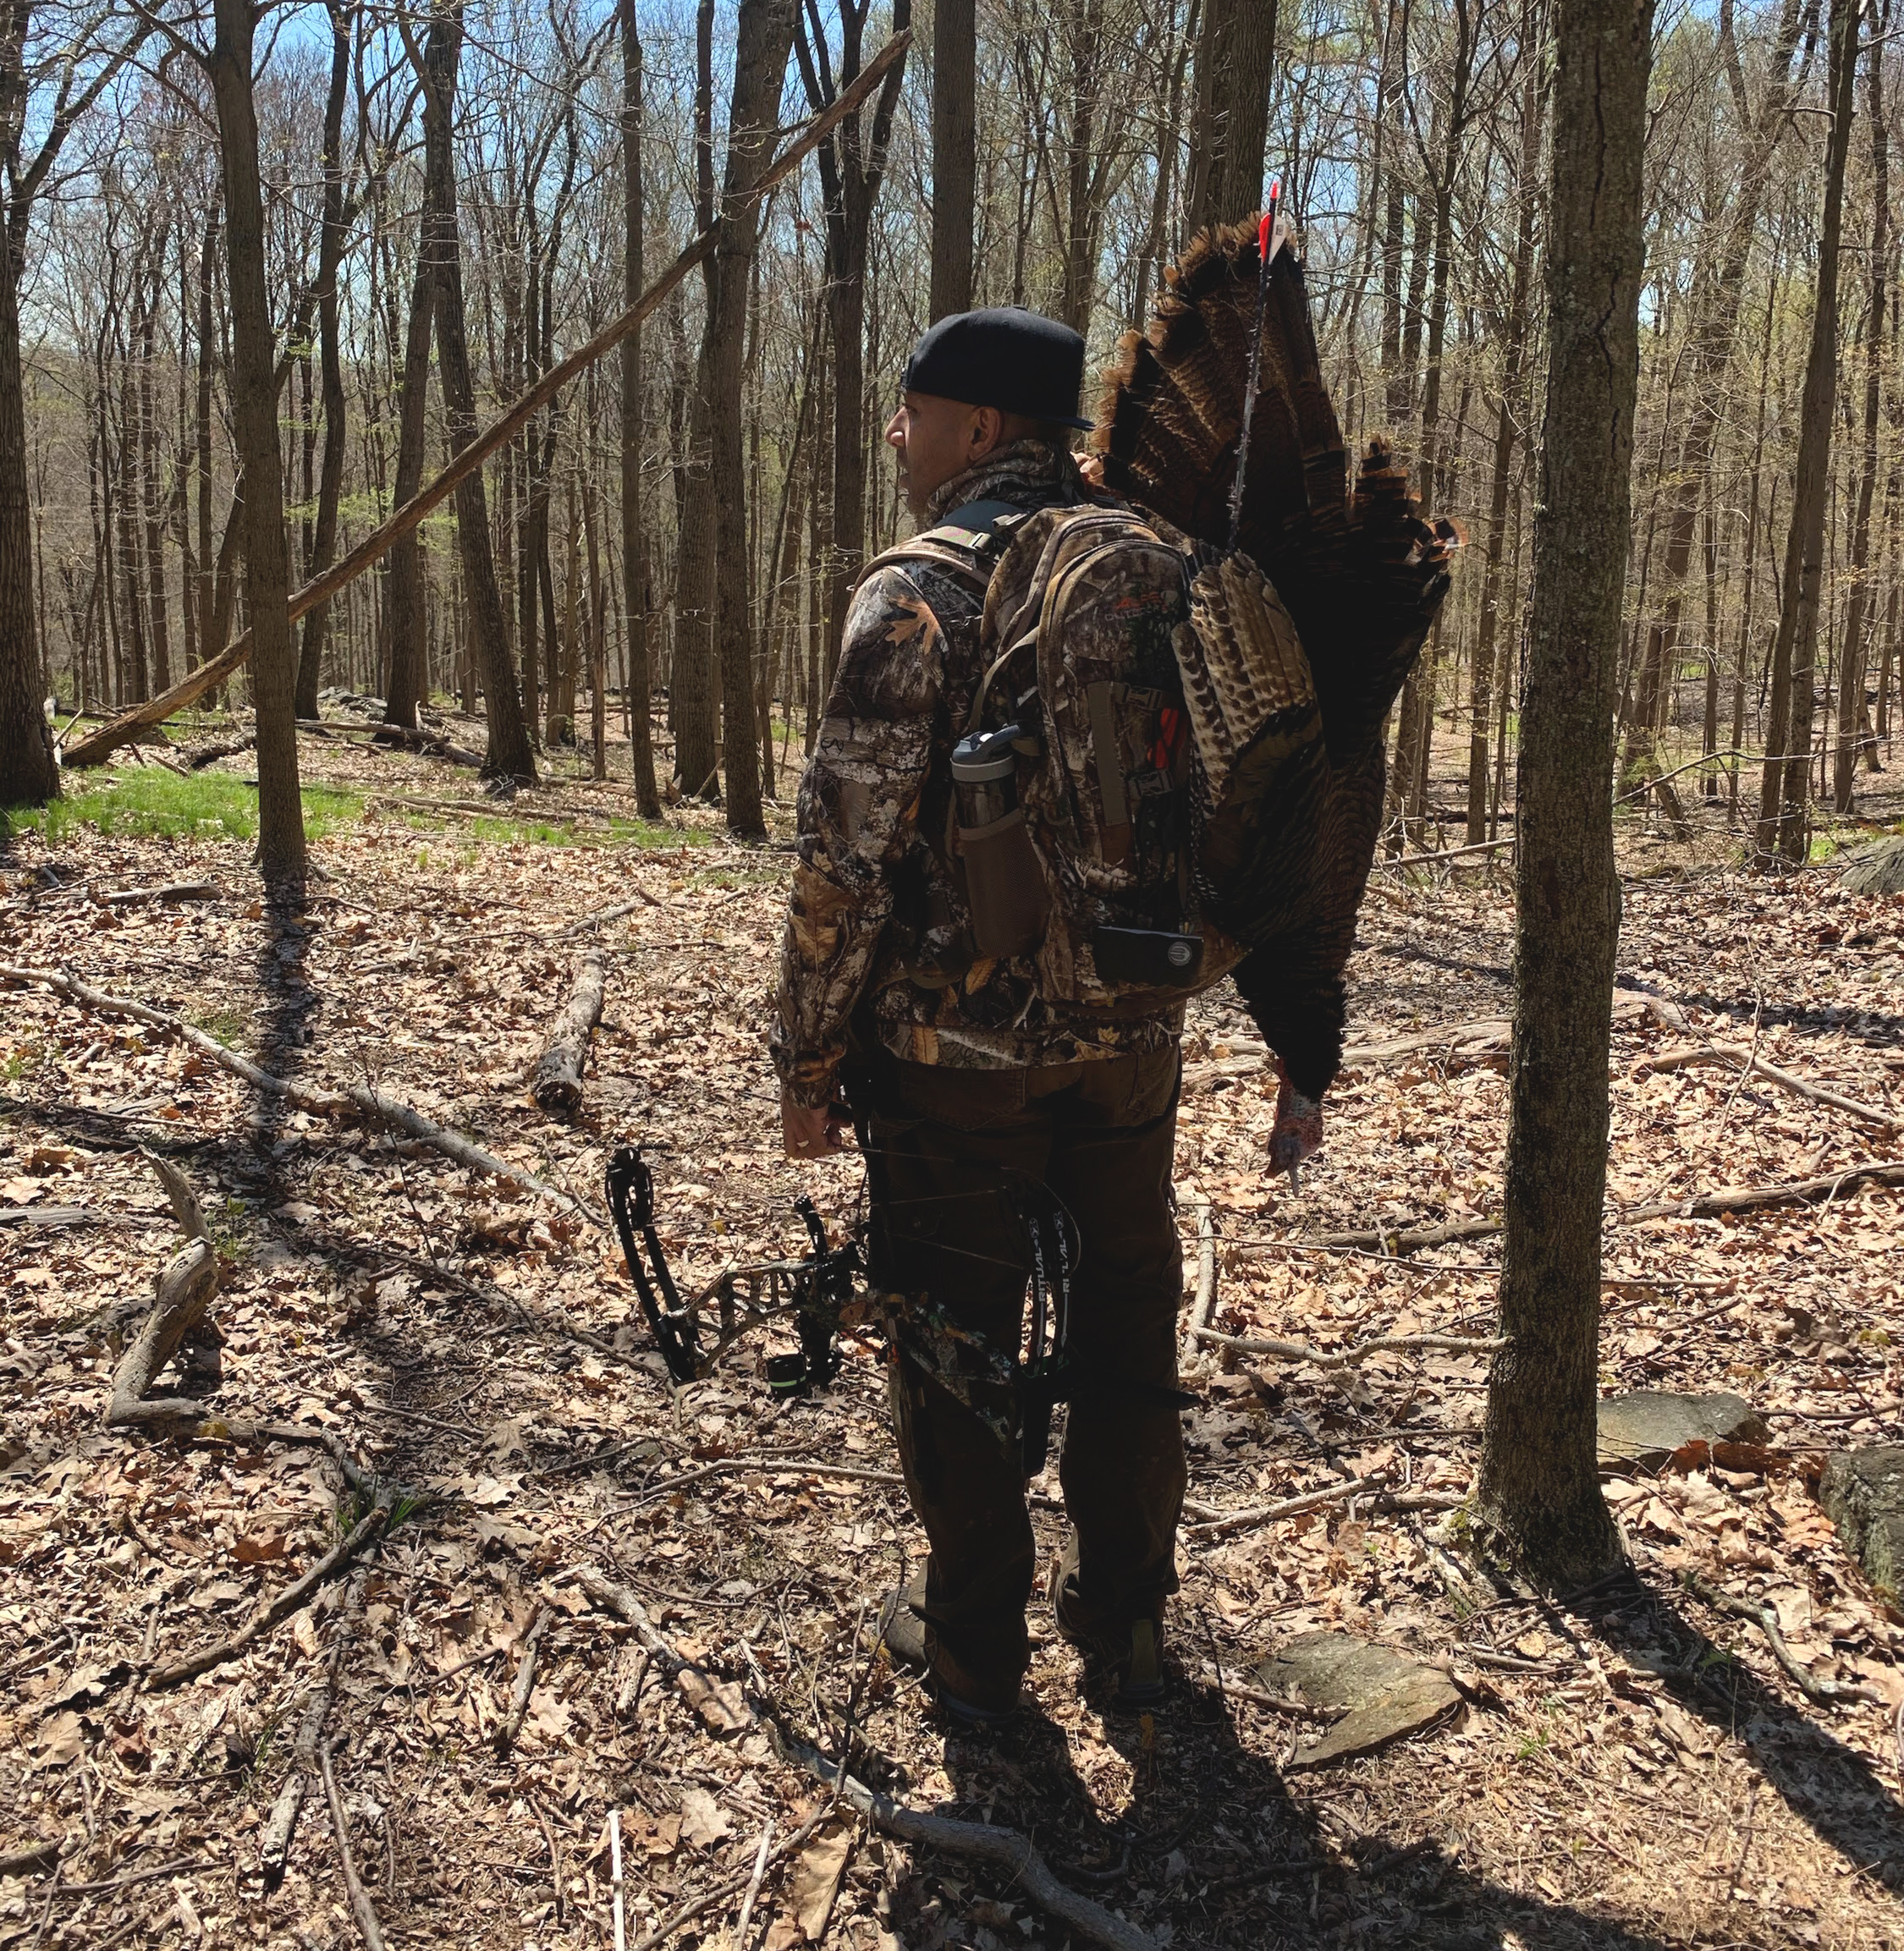 An urban bowhunter who made the trip to the spring turkey woods.